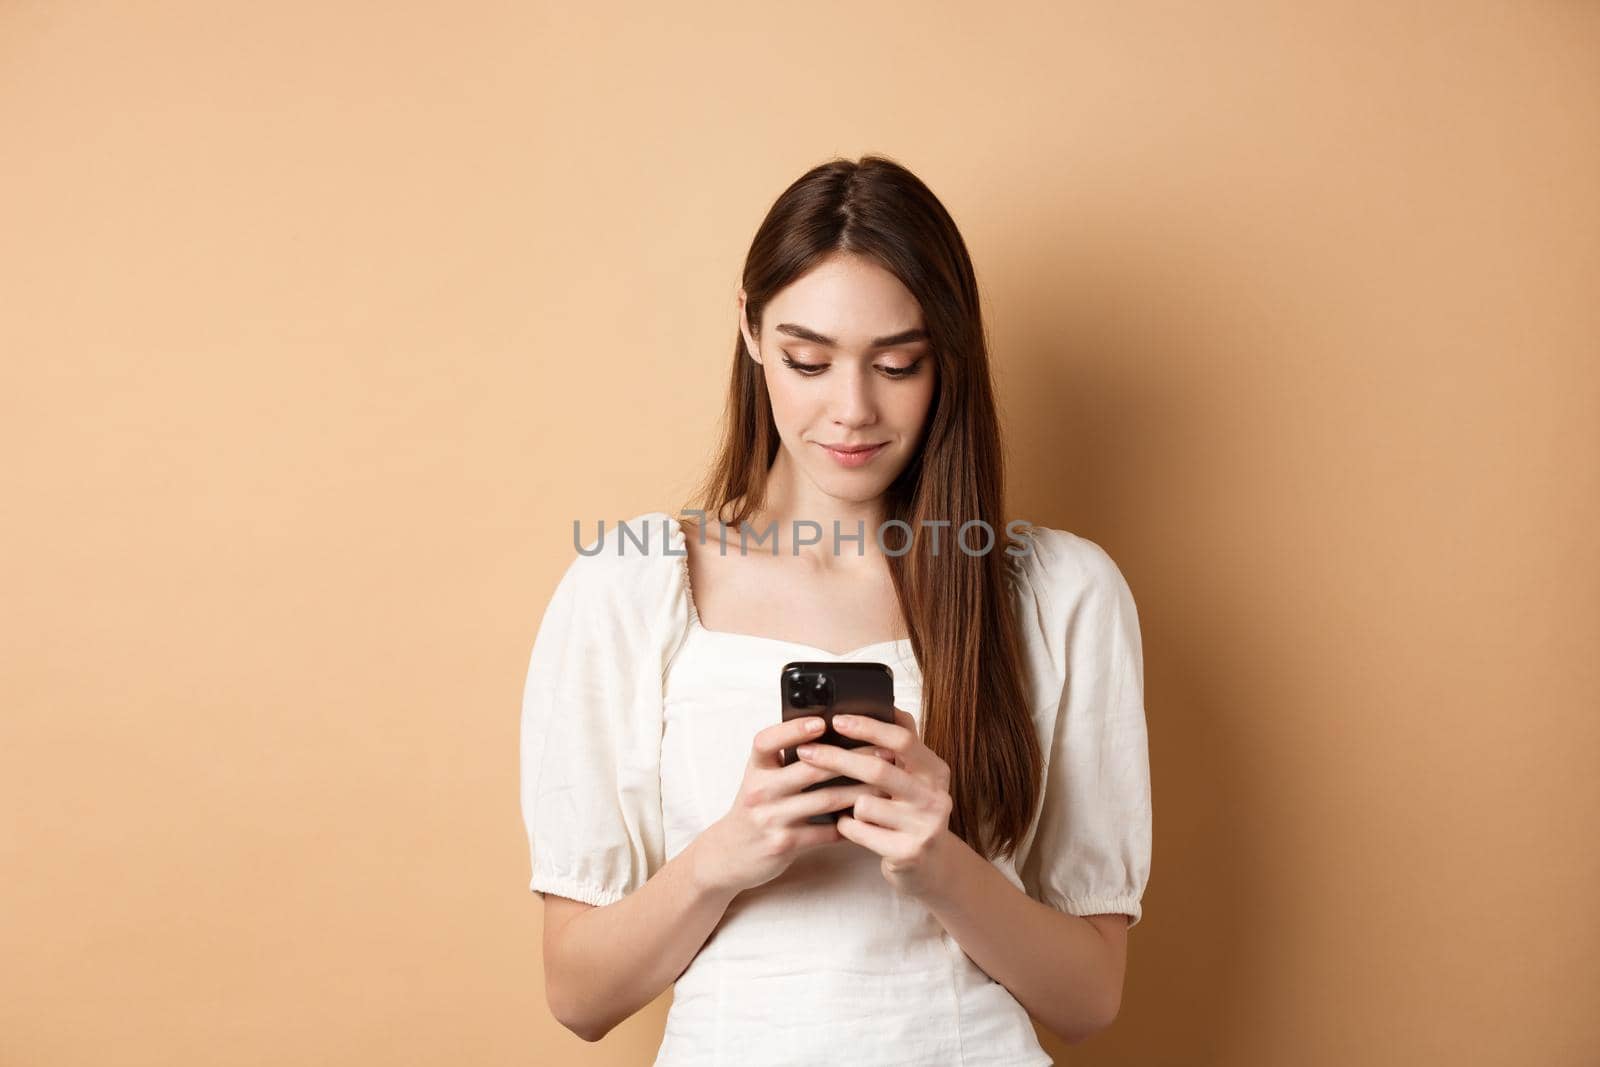 Pretty woman texting on smartphone cell phone, reading screen and smiling, standing on beige background.